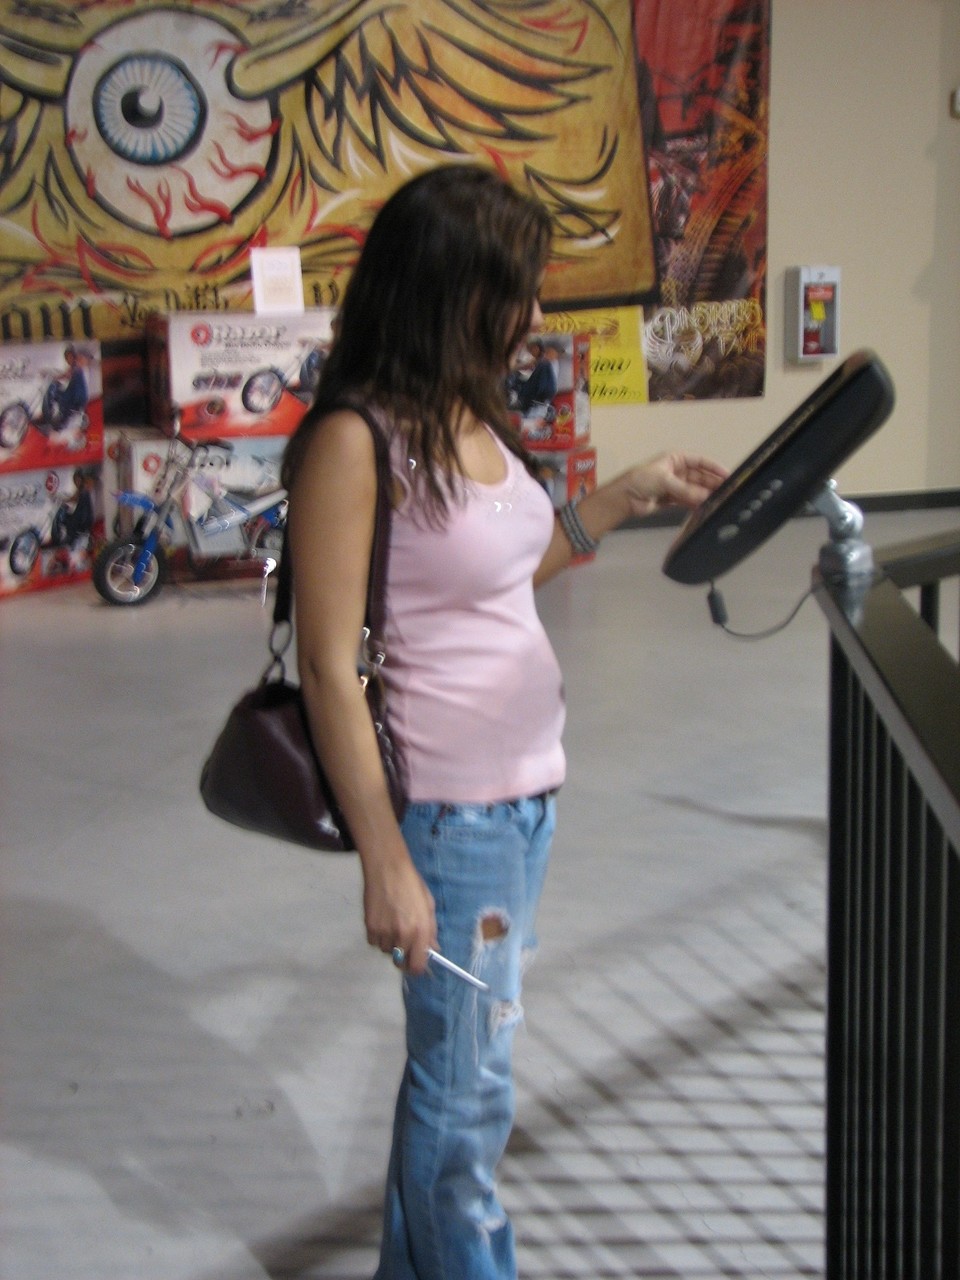 Amateur Katie in tight jeans flashes her big boobs with puffy nips in public 色情照片 #426861592